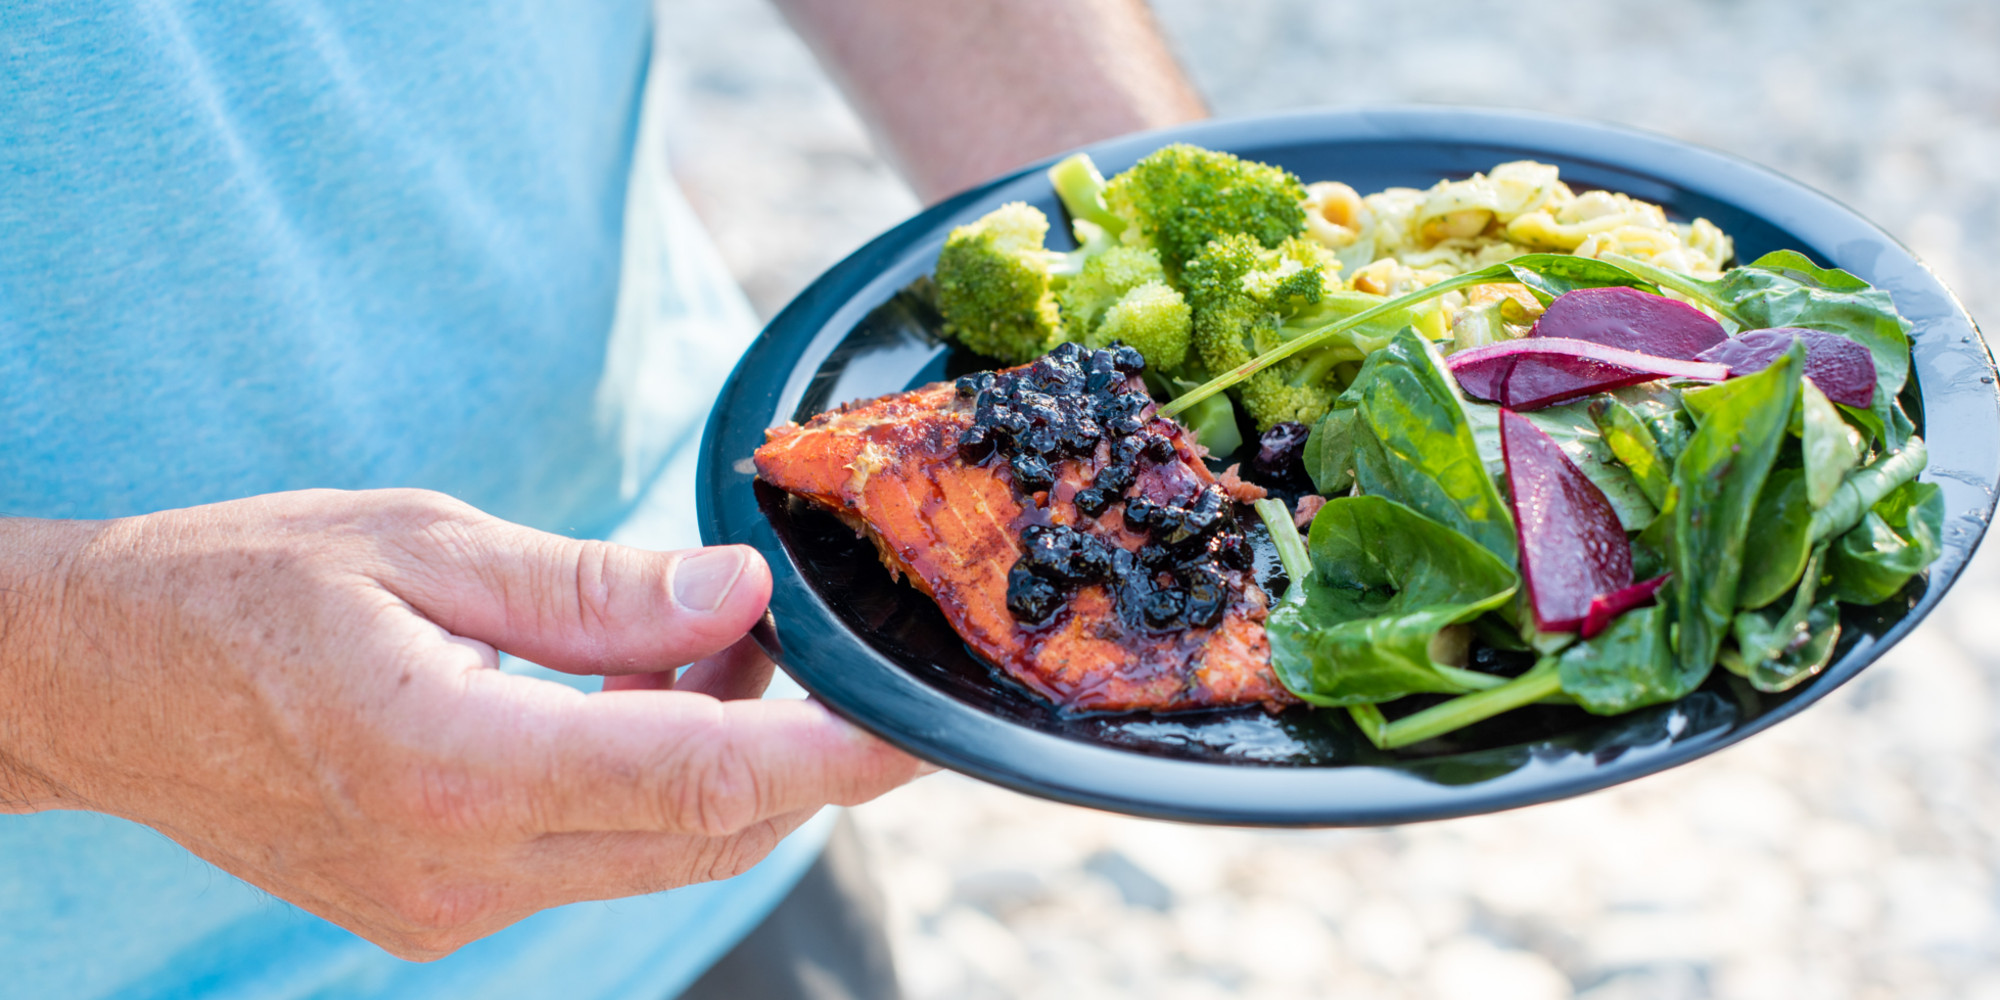 A hand holding a black plate of cooked salmon with huckleberries on top and a salad on the side